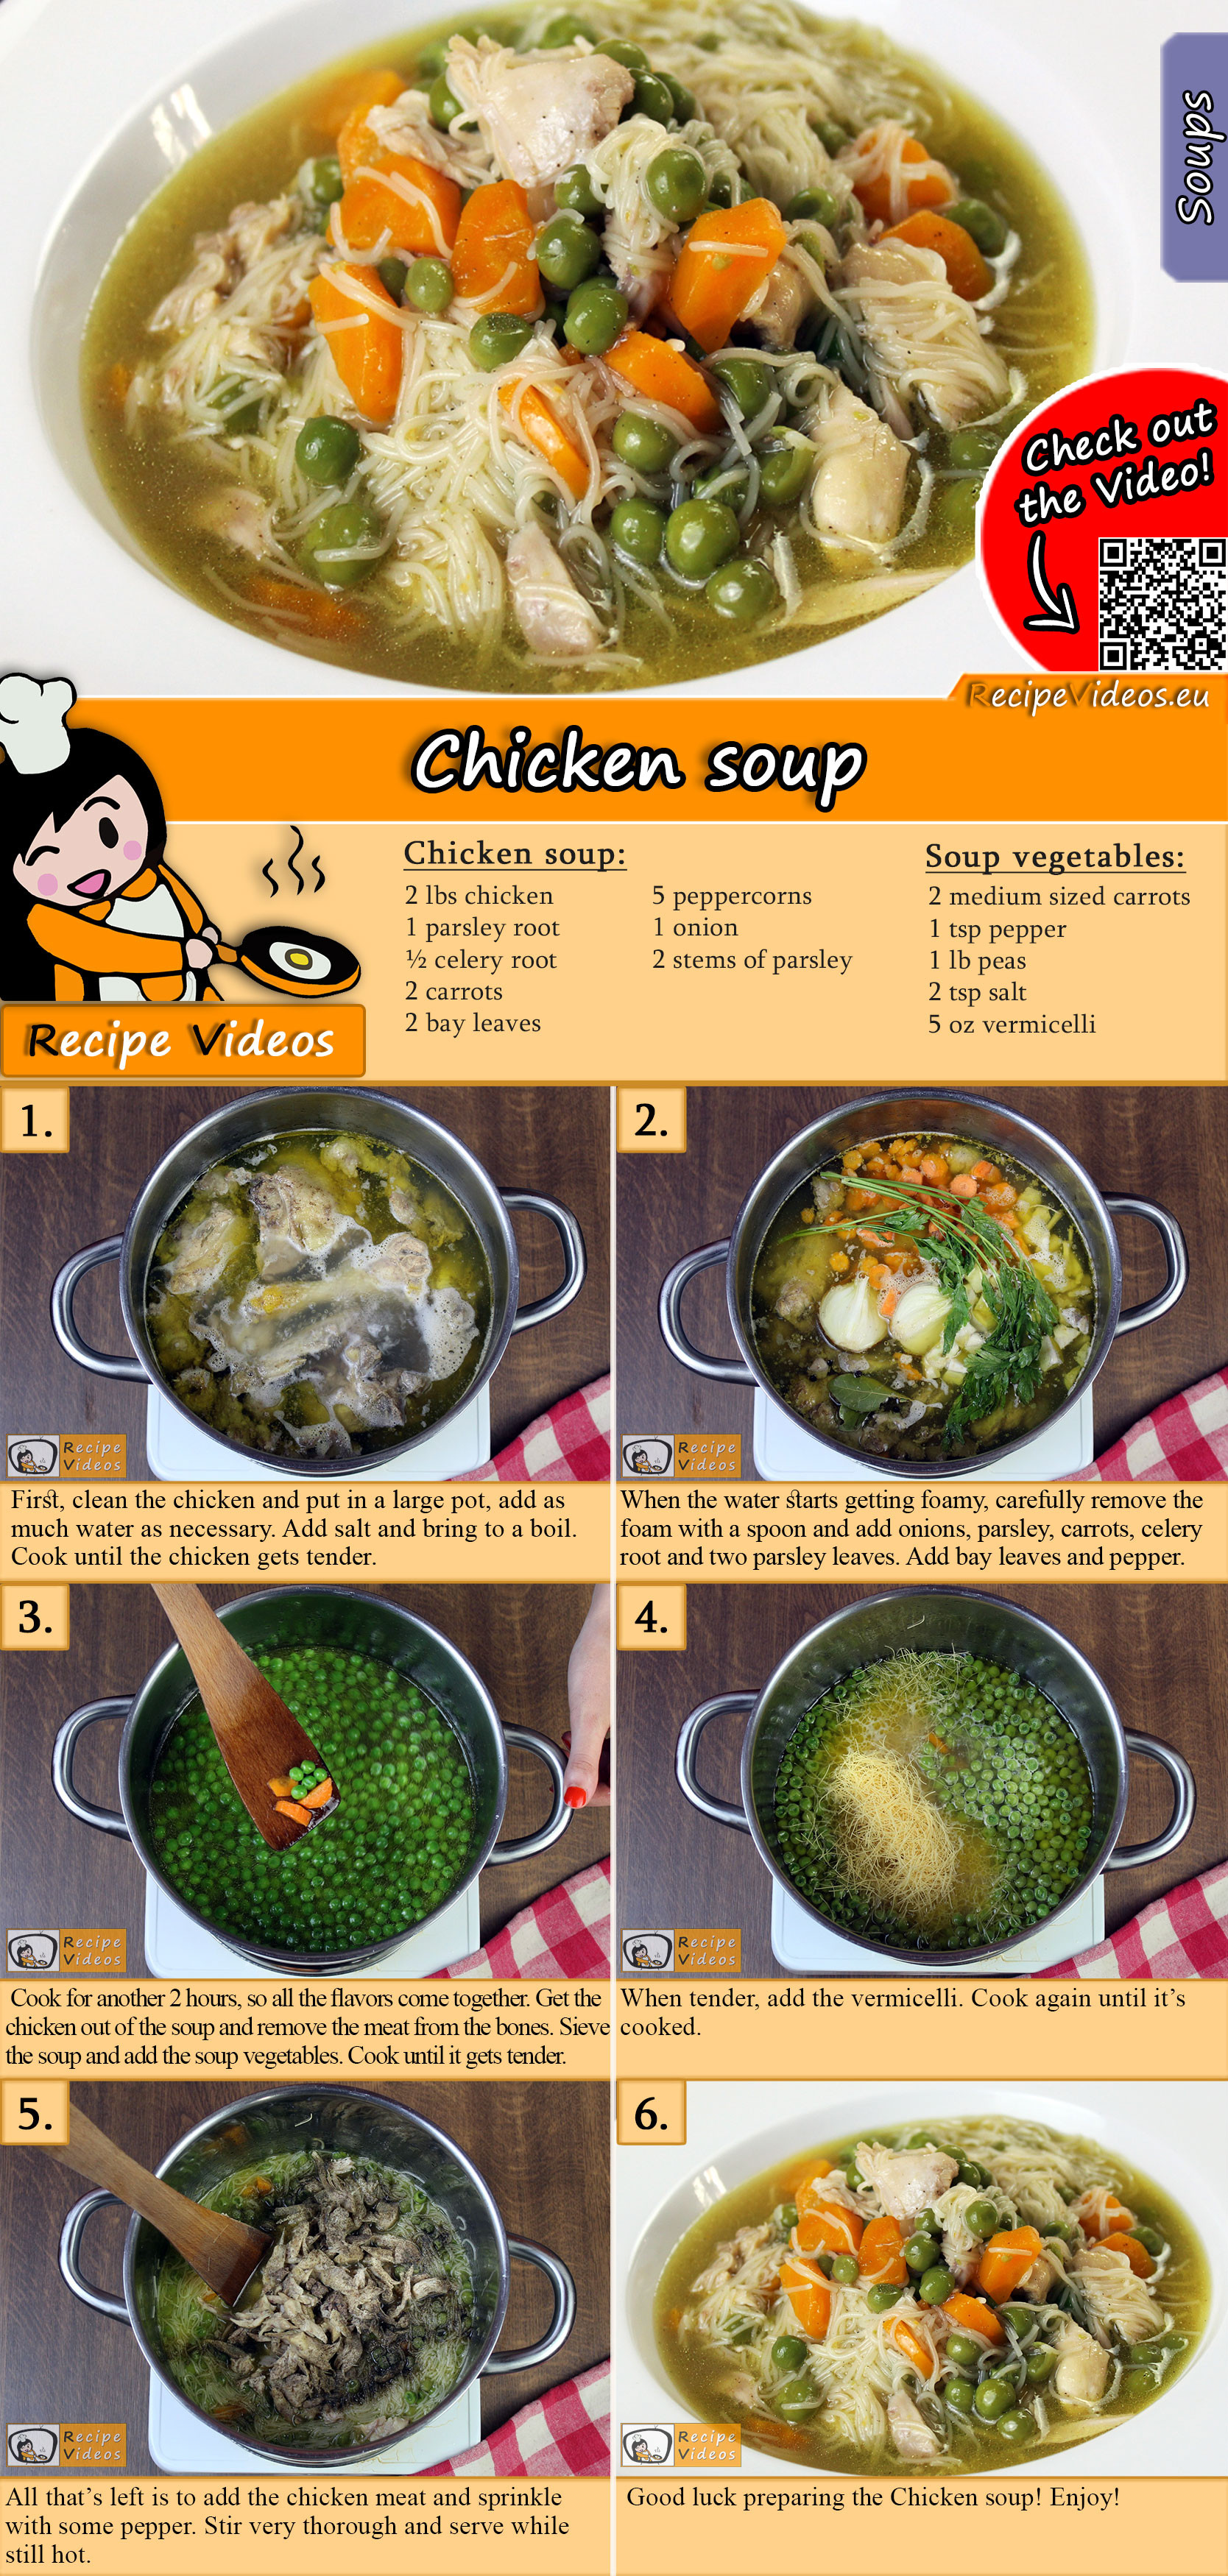 Chicken soup recipe with video